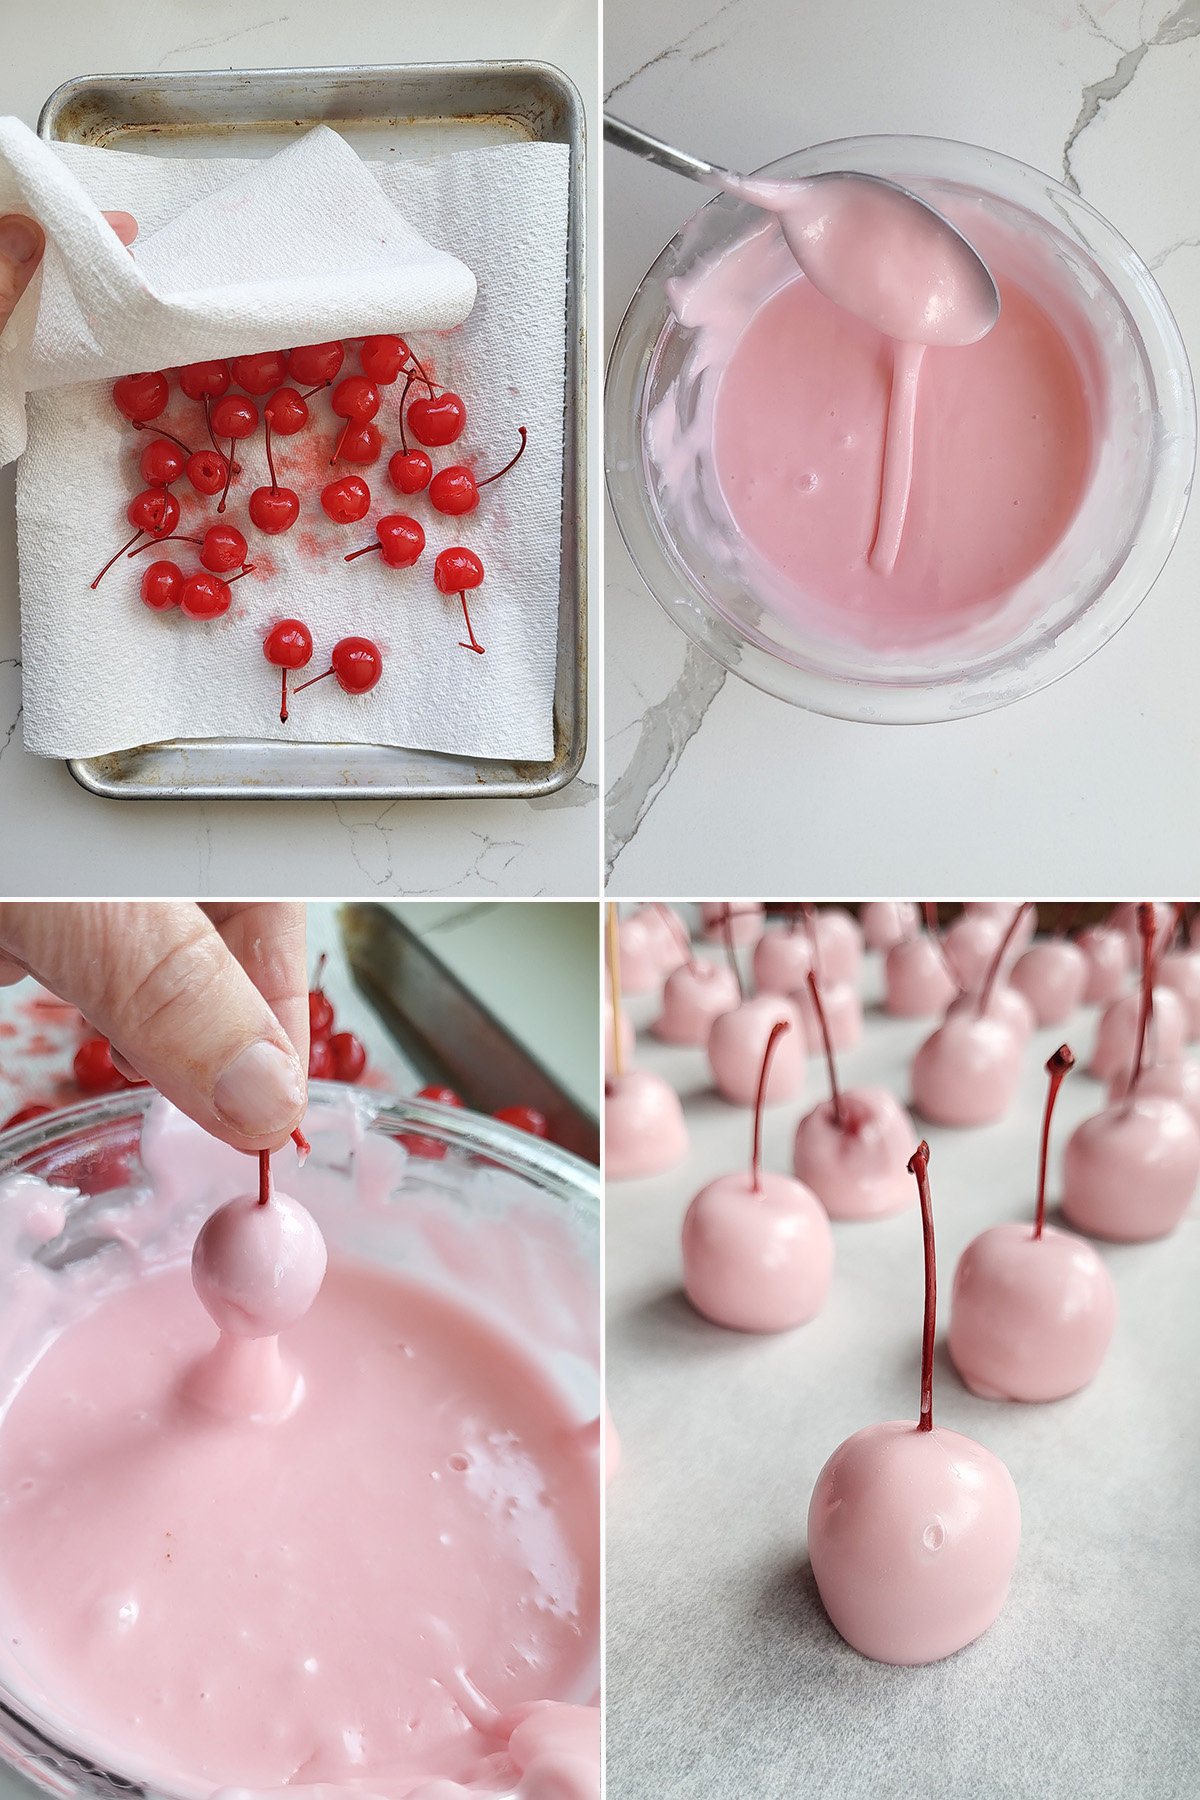 cherries on paper towels. A bowl of fondant with a spoon. A hand dipping a cherry in pink fondant. A cherry on a tray.